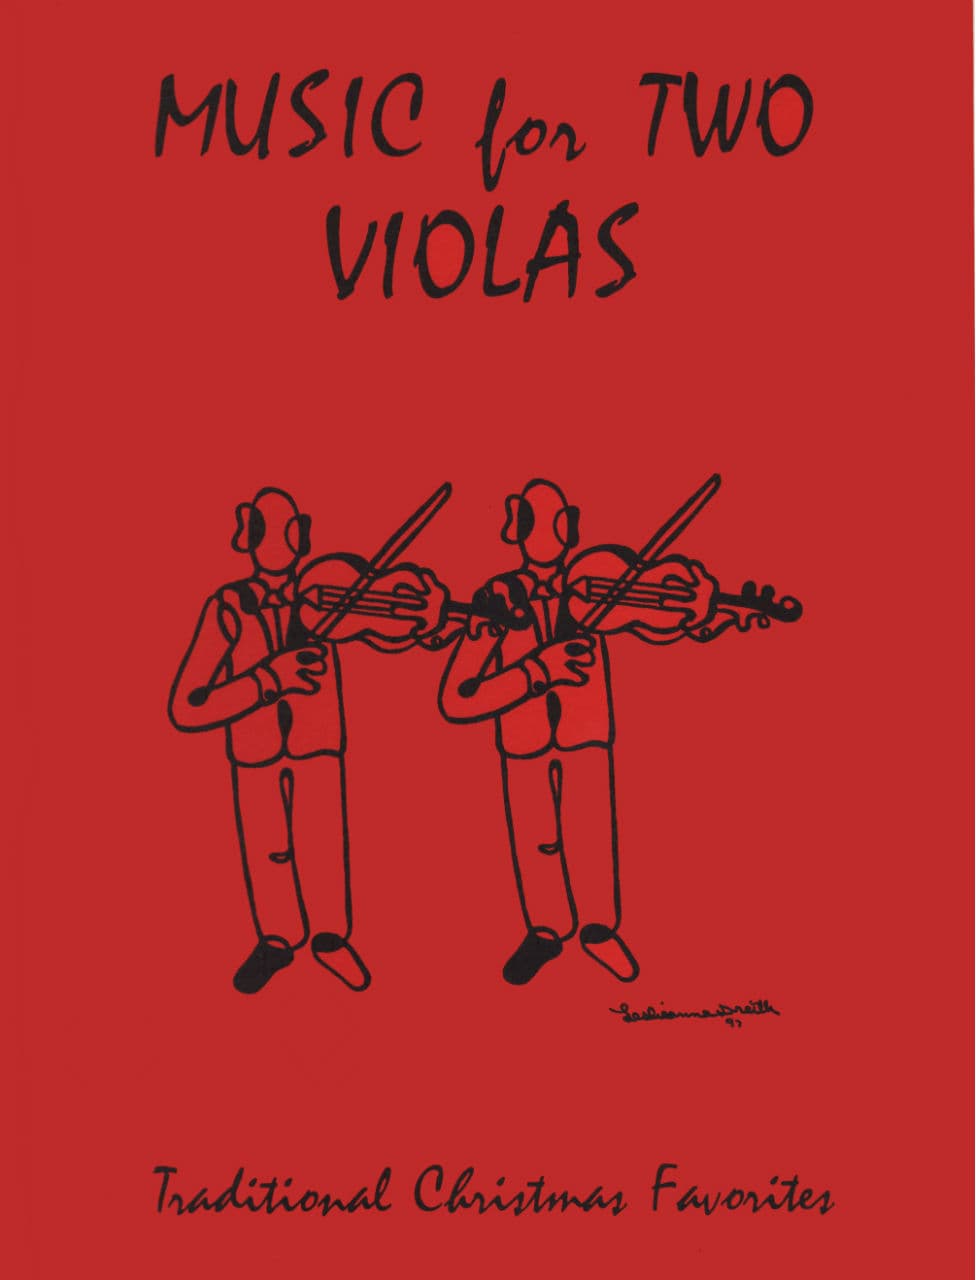 Music for Two Violas: Traditional Christmas Favorites  Published by Last Resort Music